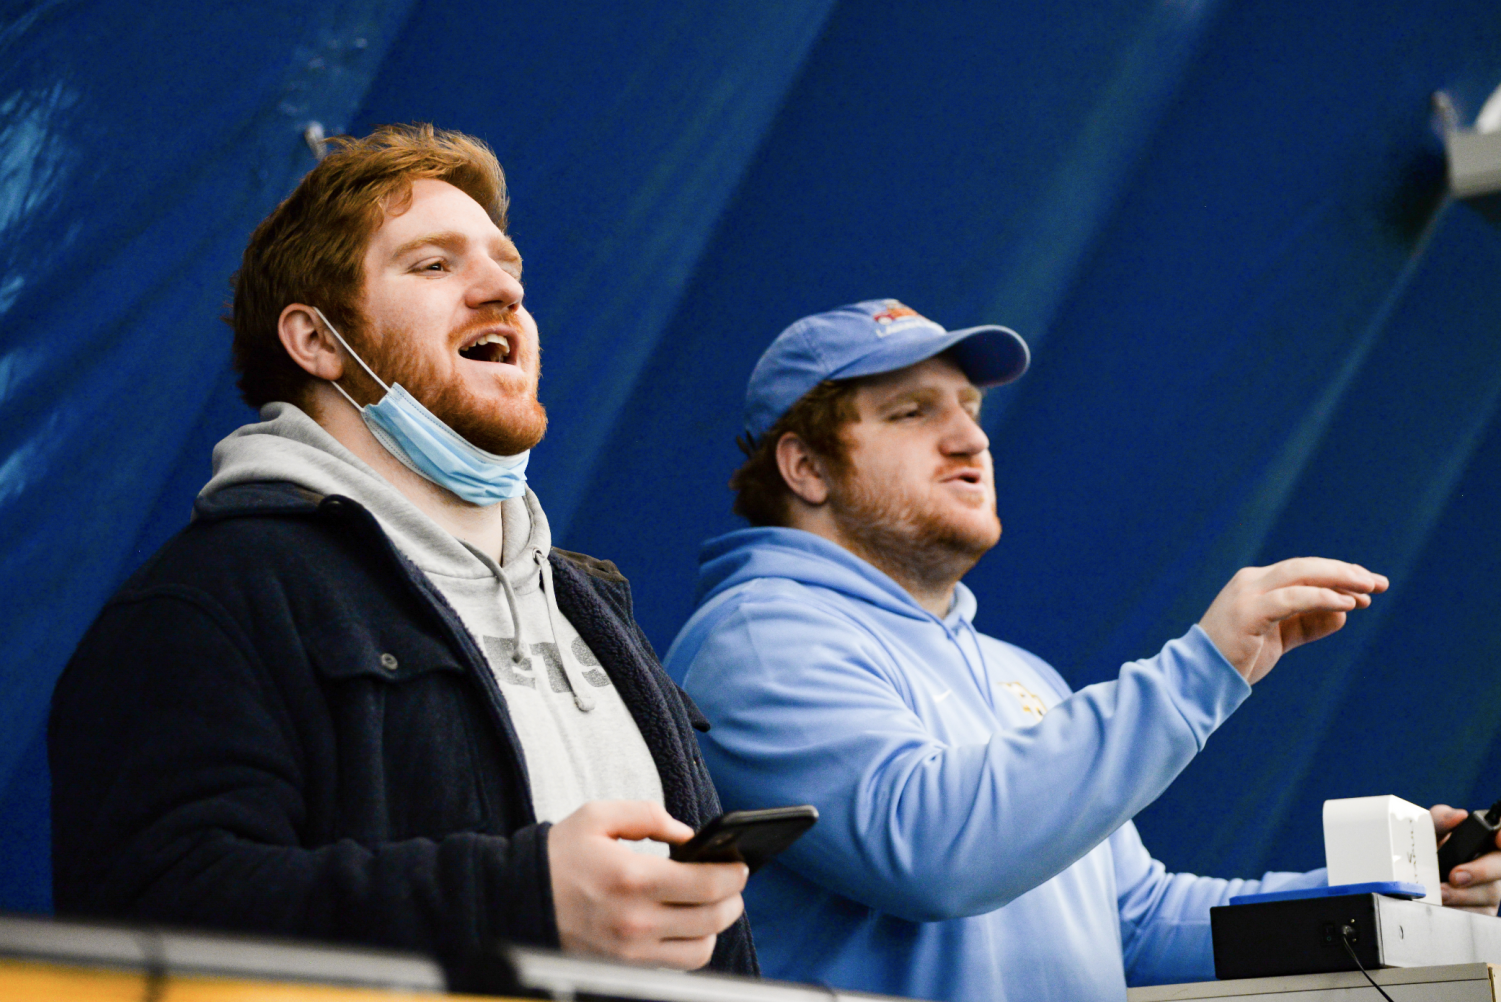 Nick and Joey Artinian cheer for the mens lacrosse team from the sidelines.